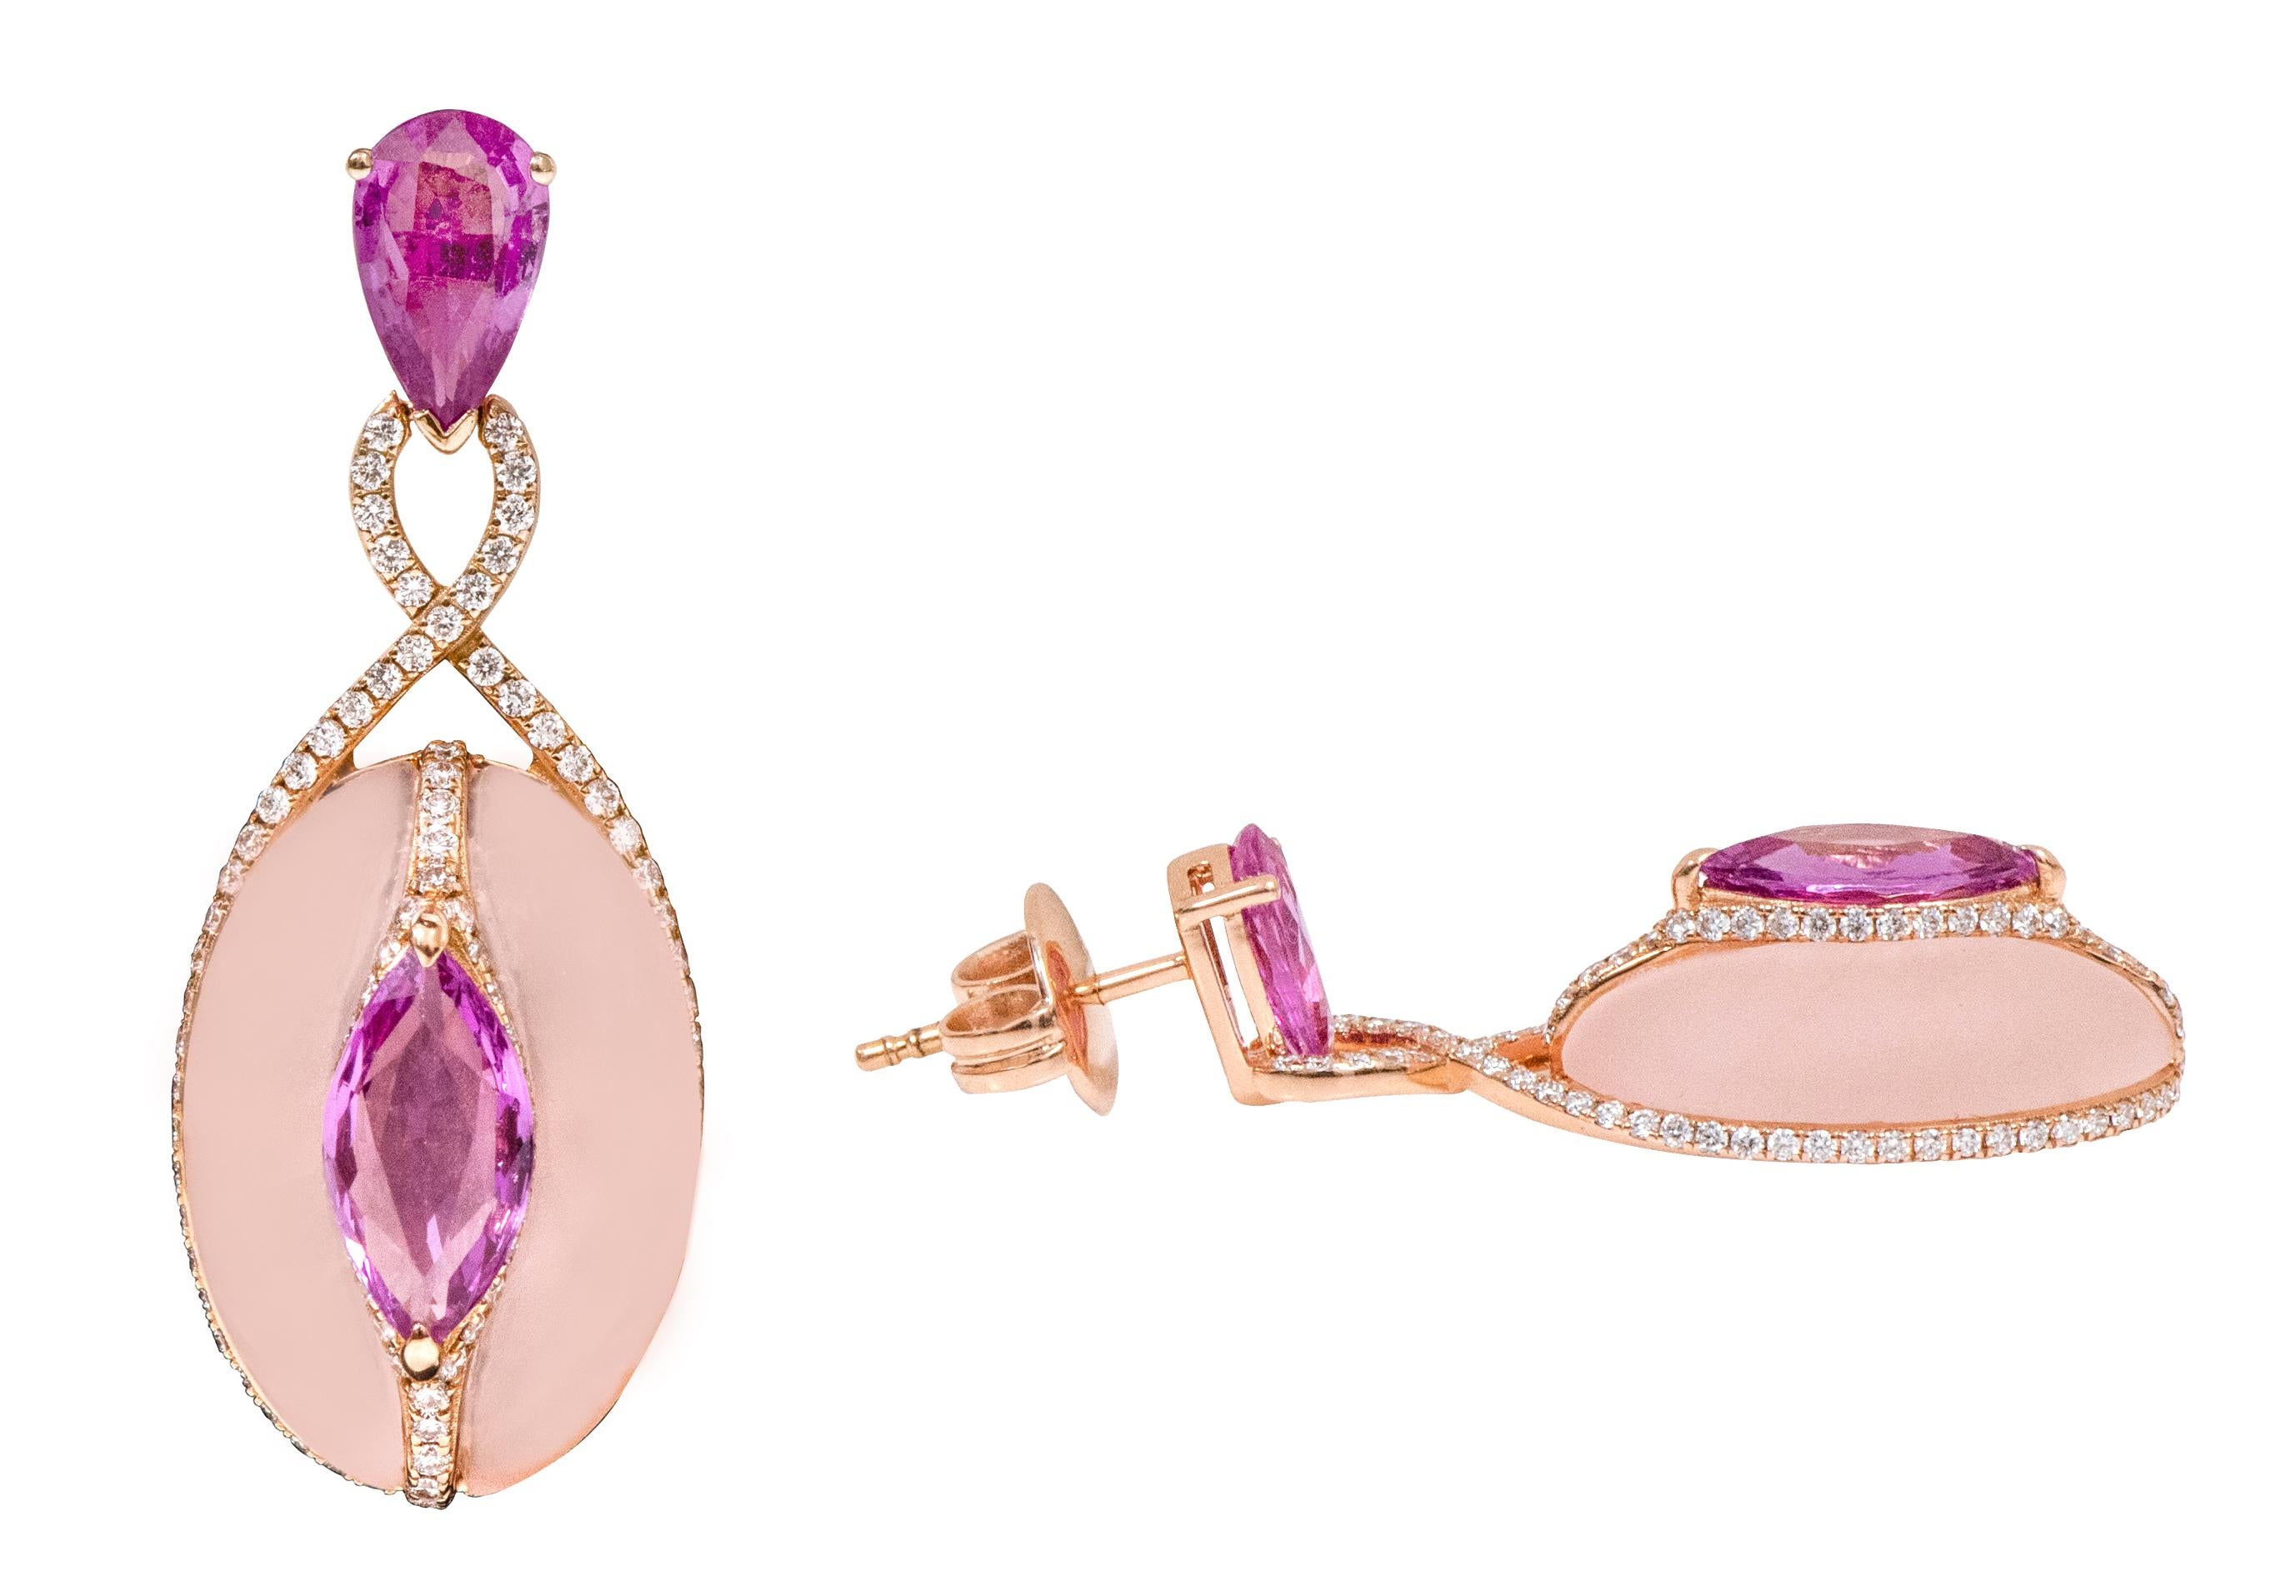 18 Karat Rose Gold 21.39 Carat Diamond, Pink Sapphire, and Rose Quartz Drop Earrings

This glorious vibrant pink sapphire and rose quartz mix concept earring is mesmerizing. The solitaire marquise shaped pink sapphire in the center is covered with a